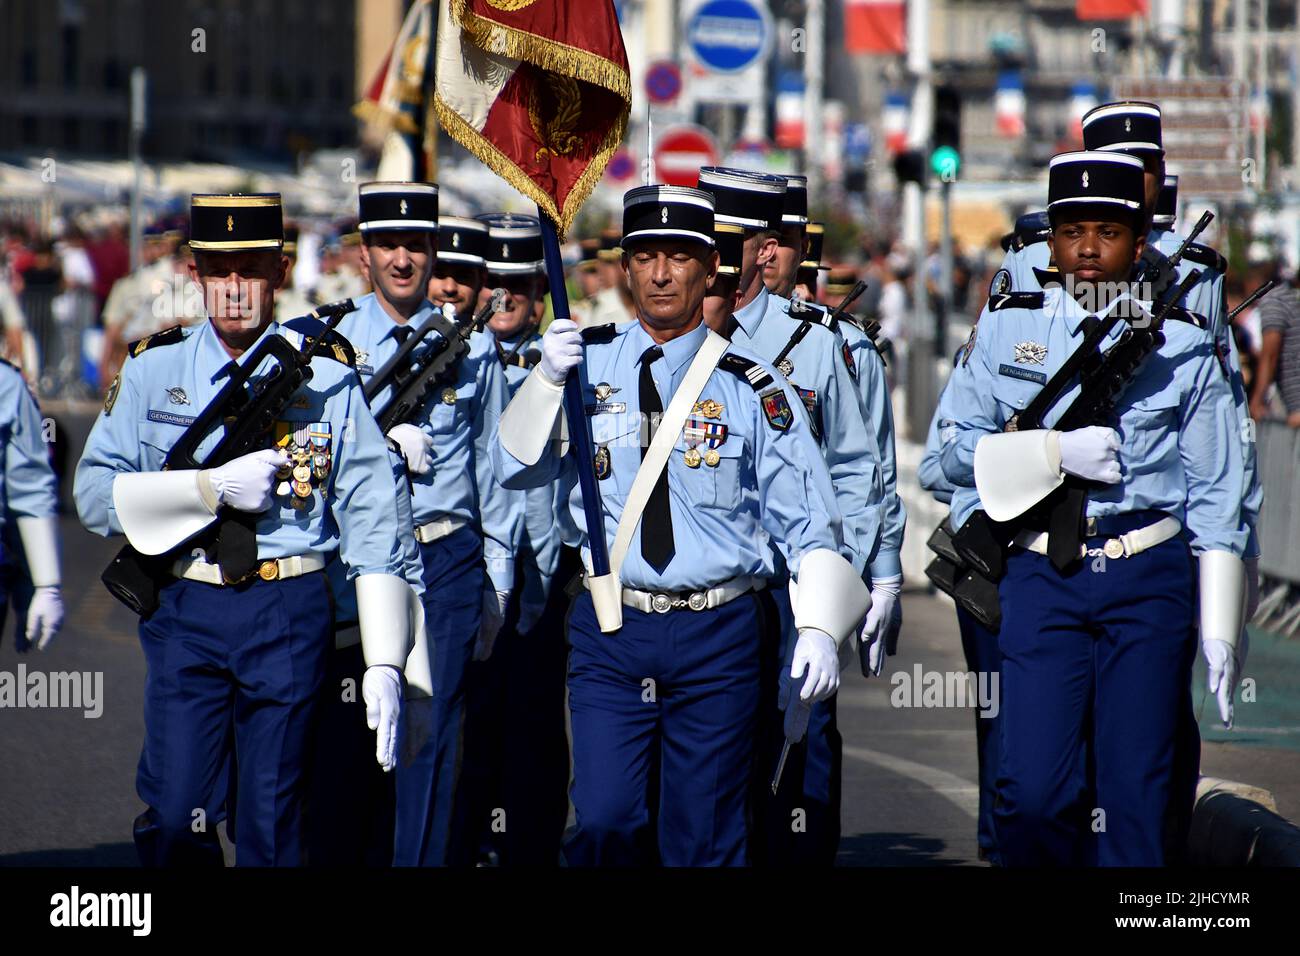 Members of the Gendarmerie parade march through the Old Port of ...